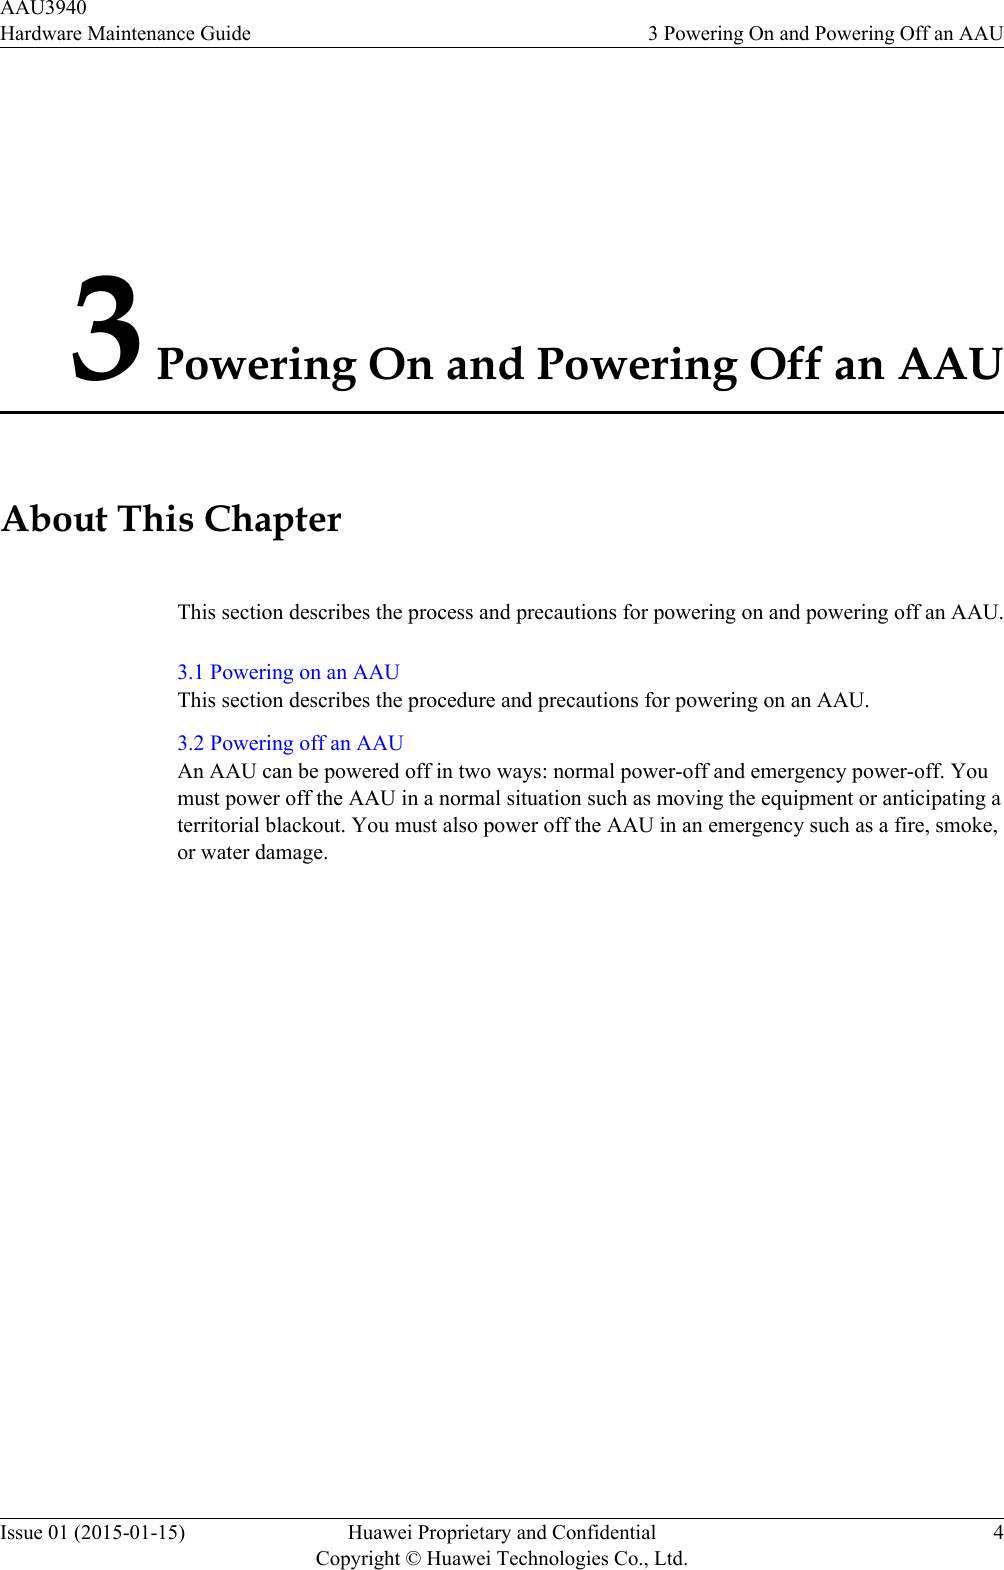 3 Powering On and Powering Off an AAUAbout This ChapterThis section describes the process and precautions for powering on and powering off an AAU.3.1 Powering on an AAUThis section describes the procedure and precautions for powering on an AAU.3.2 Powering off an AAUAn AAU can be powered off in two ways: normal power-off and emergency power-off. Youmust power off the AAU in a normal situation such as moving the equipment or anticipating aterritorial blackout. You must also power off the AAU in an emergency such as a fire, smoke,or water damage.AAU3940Hardware Maintenance Guide 3 Powering On and Powering Off an AAUIssue 01 (2015-01-15) Huawei Proprietary and ConfidentialCopyright © Huawei Technologies Co., Ltd.4